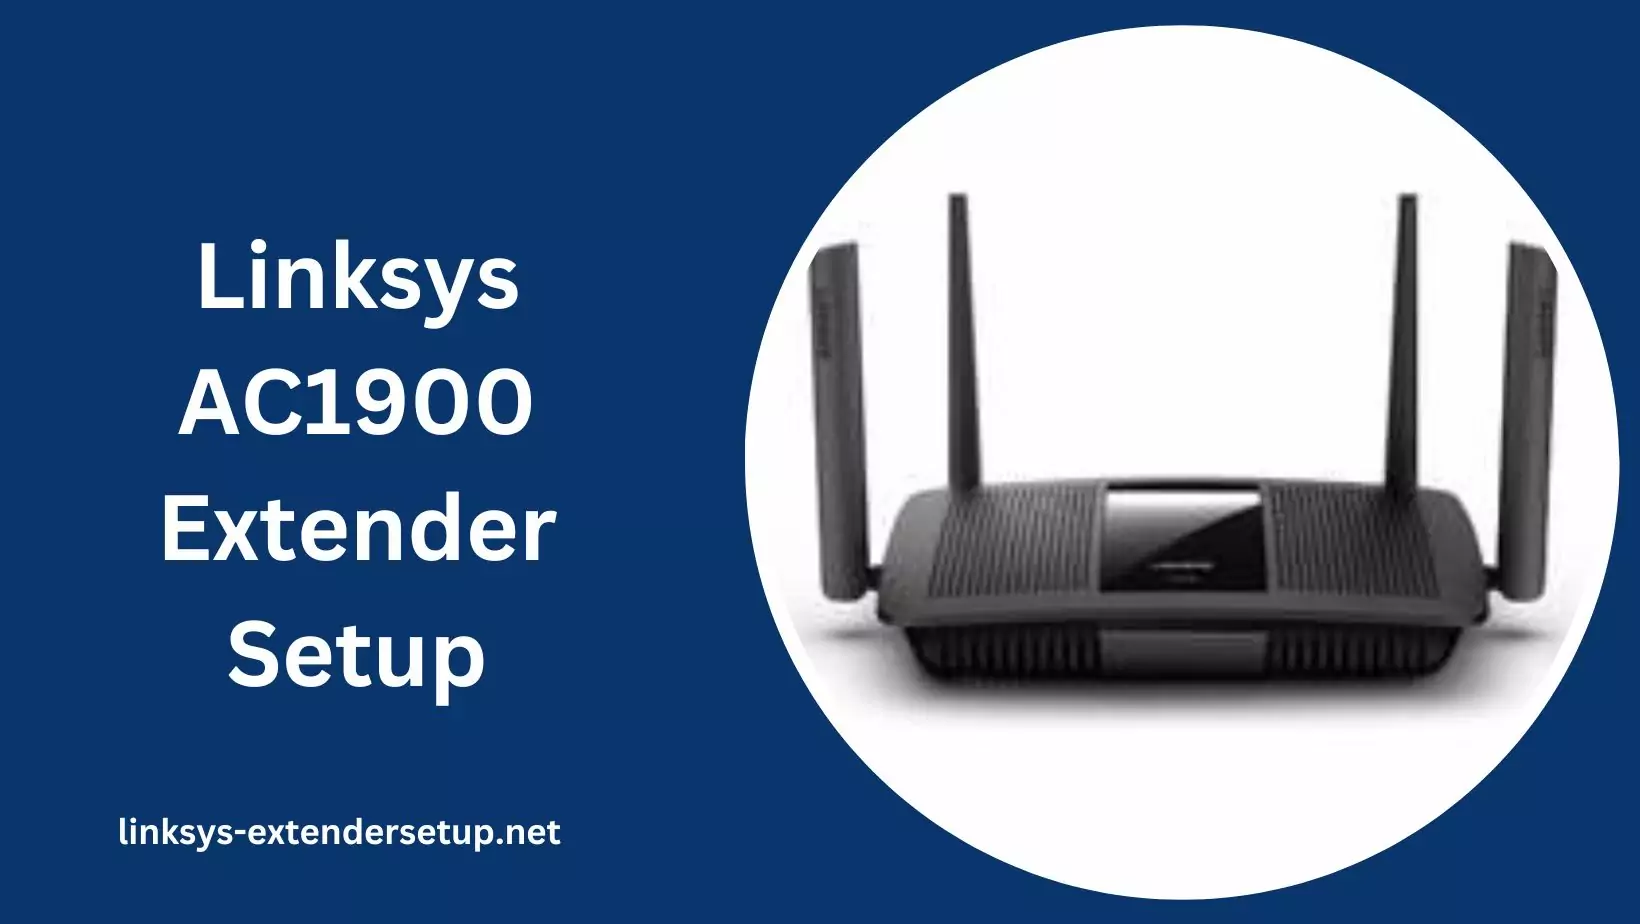 You are currently viewing Overcoming Dead Zones in Wi-Fi Using the Linksys AC1900 Extender Setup